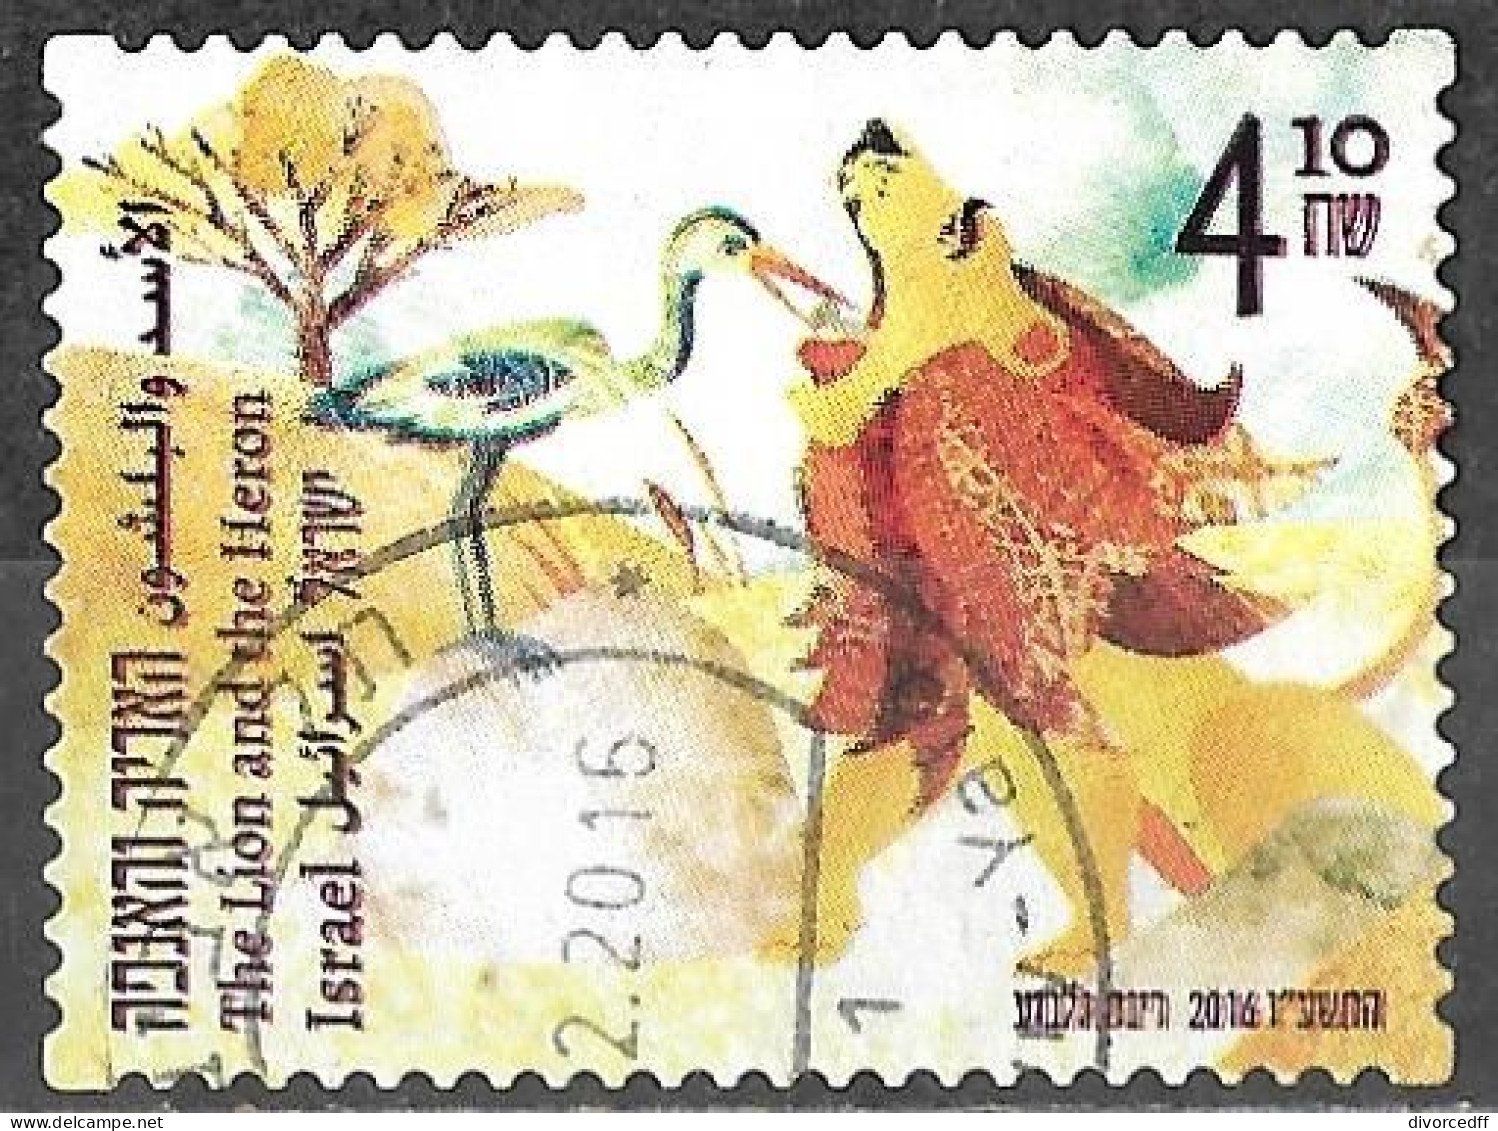 Israel 2016 Used Stamp Parables Of The Sages The Lion And The Heron [INLT12] - Usati (senza Tab)